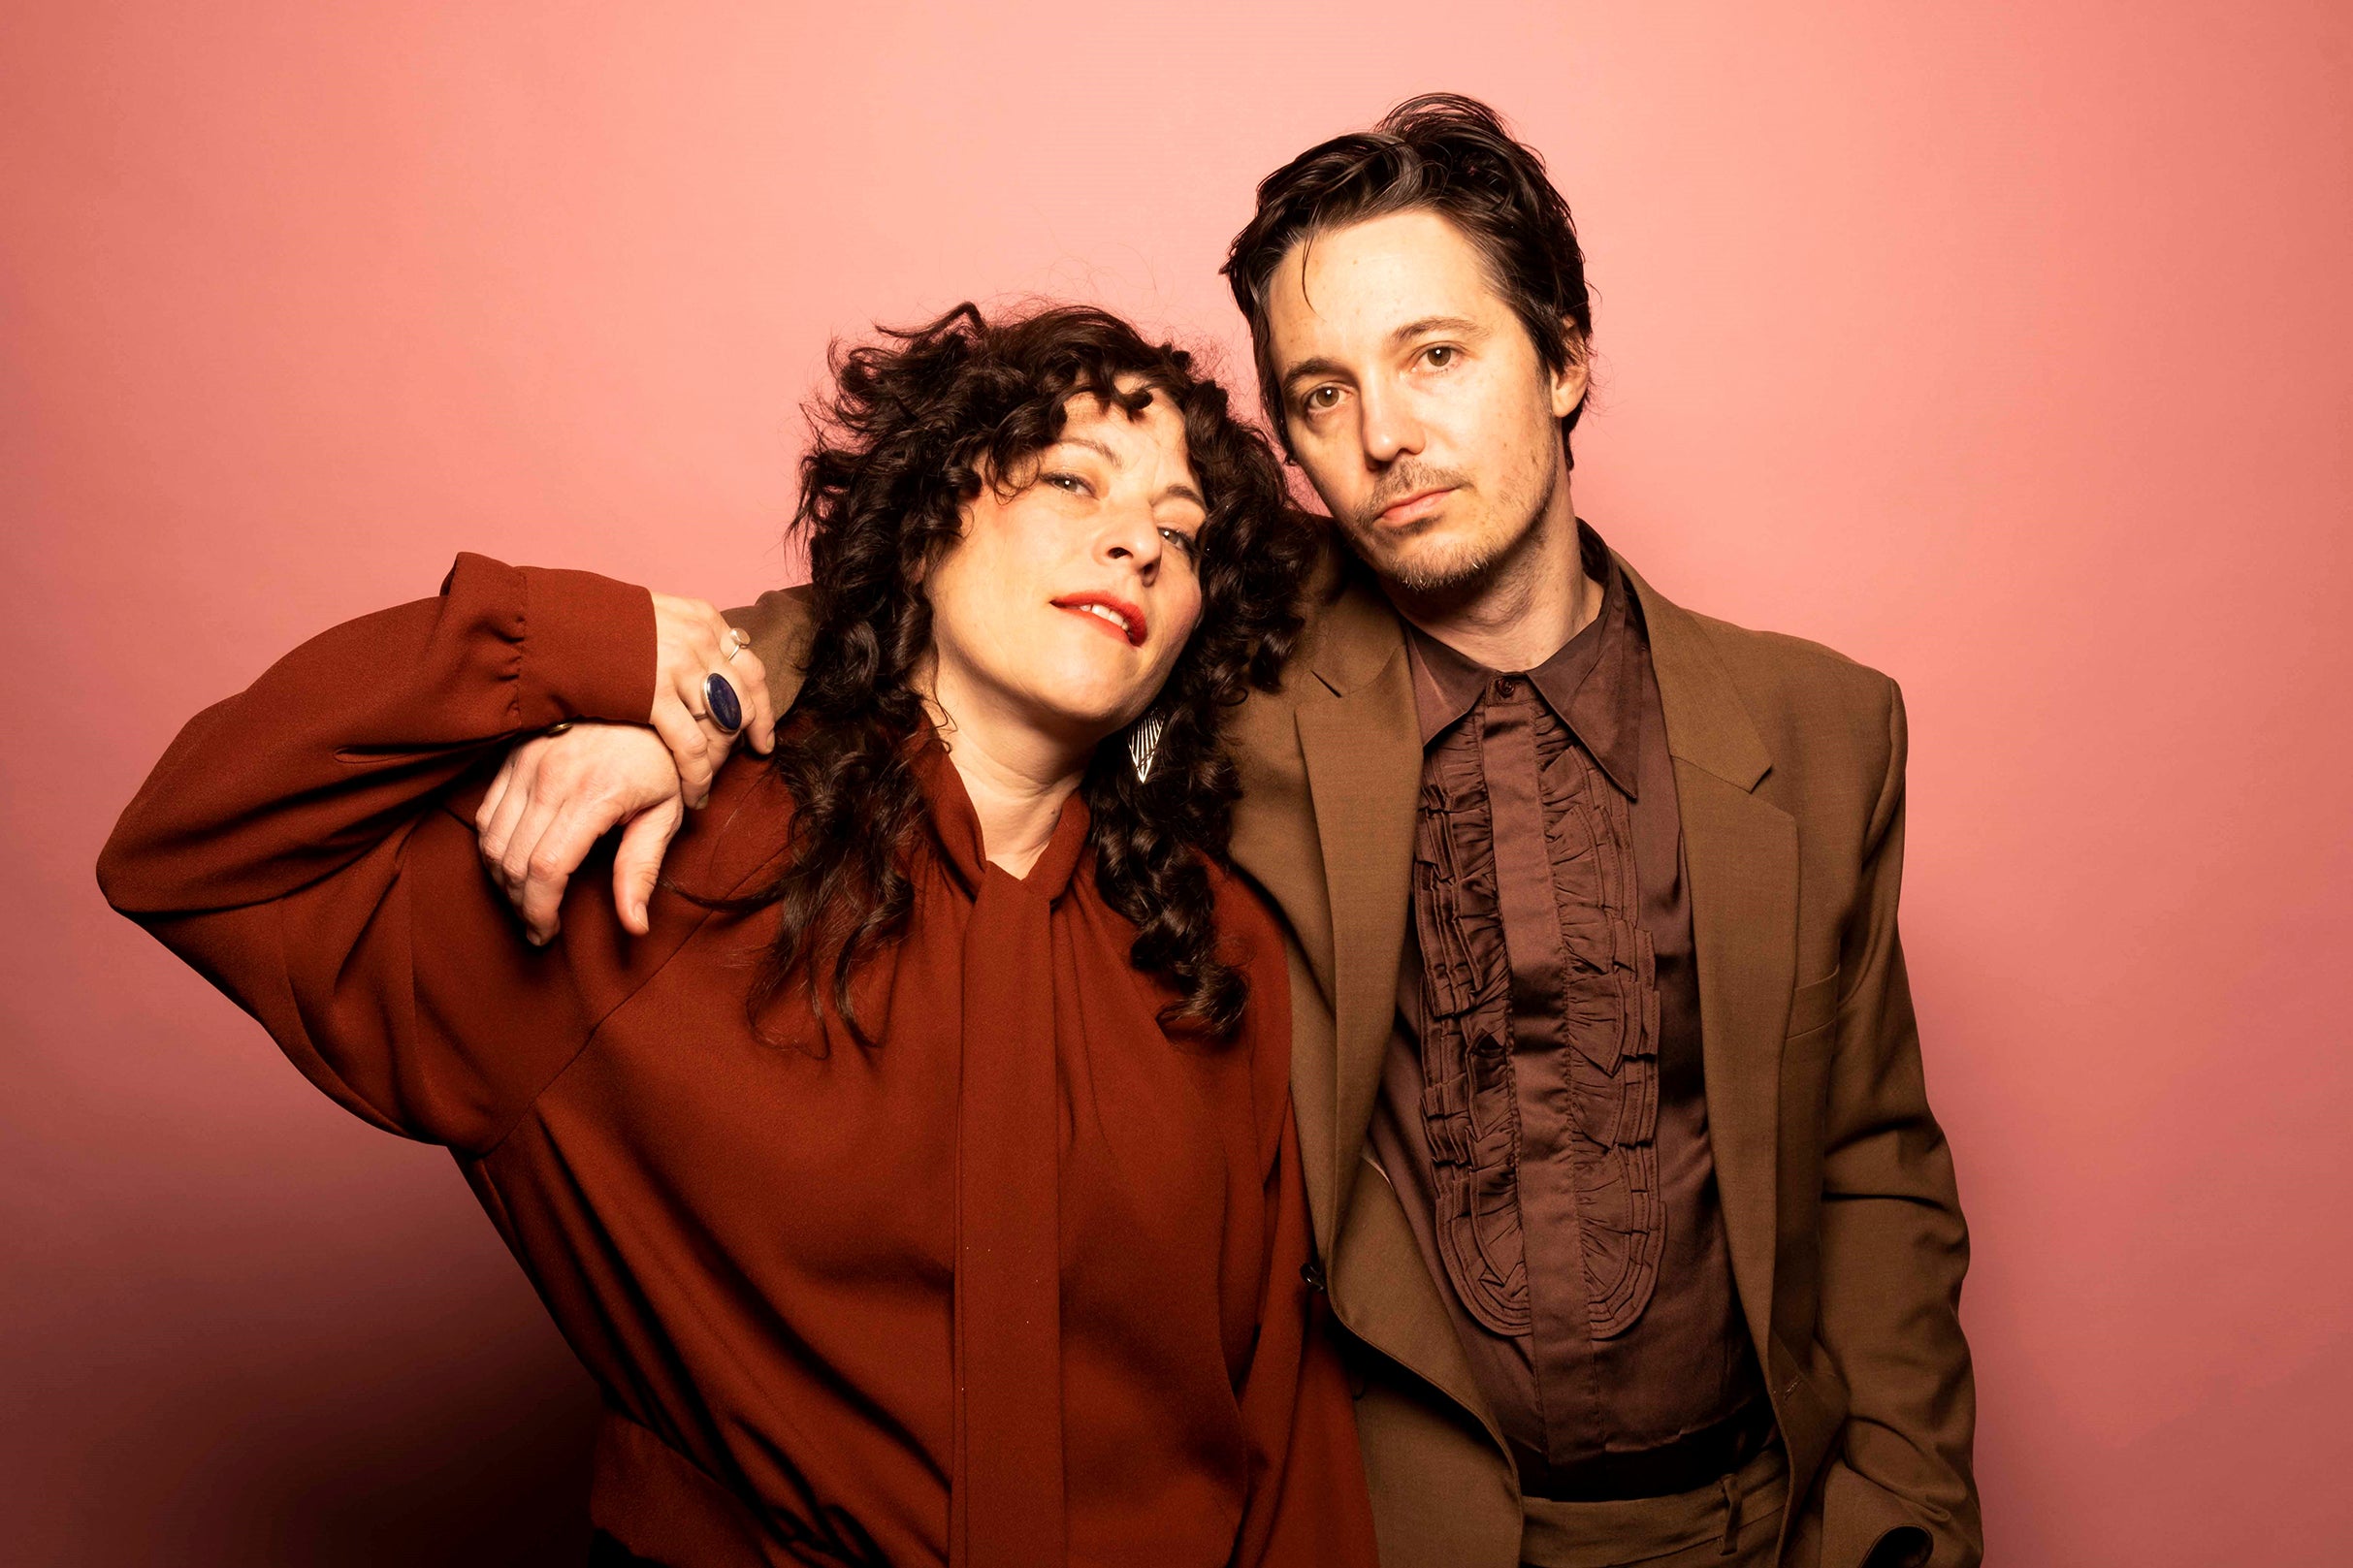 Shovels & Rope in Vancouver promo photo for VIP Package presale offer code